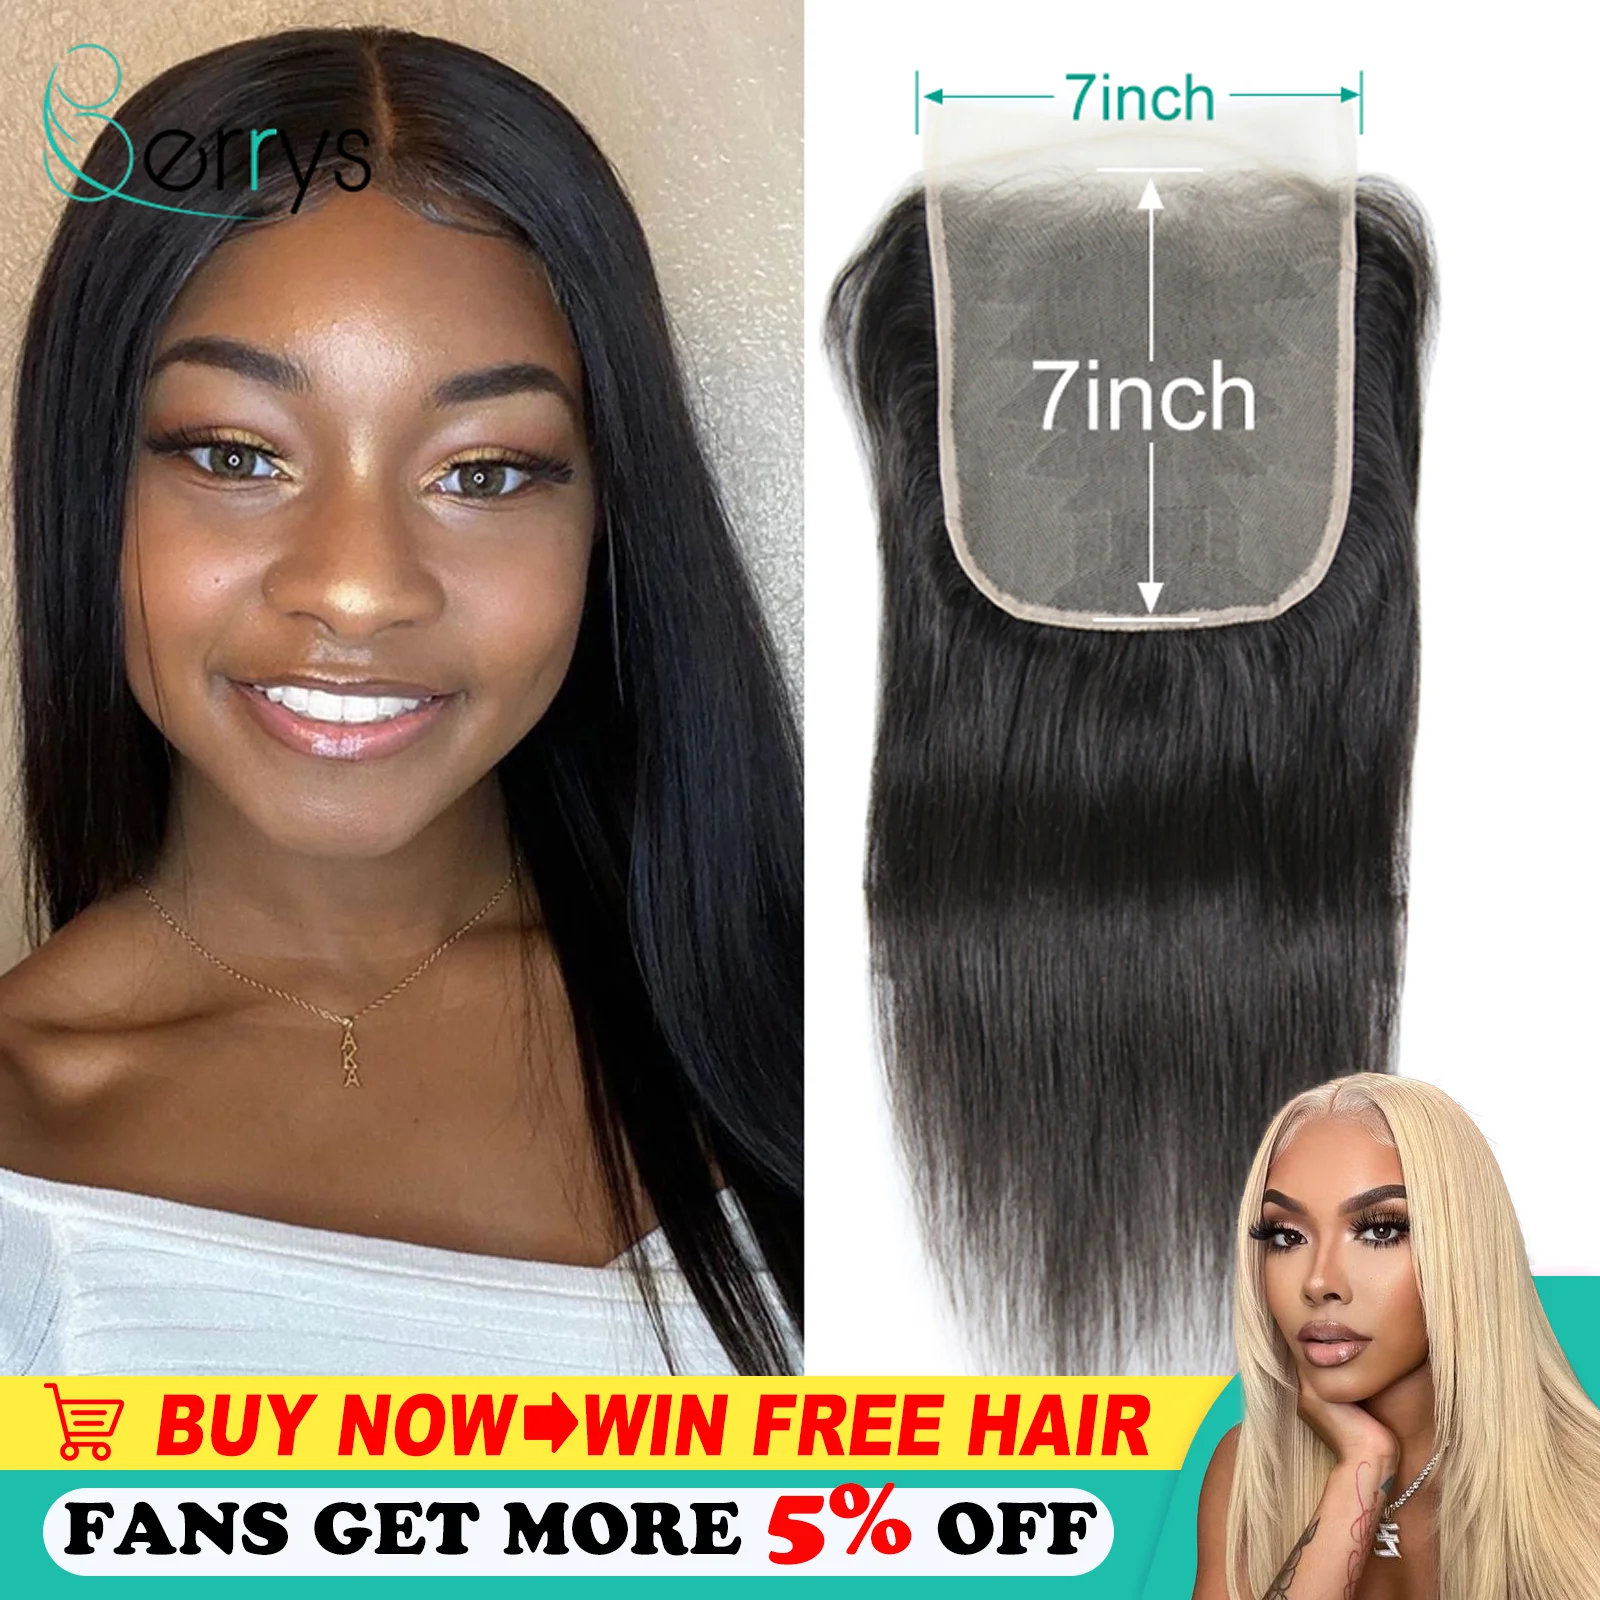 

Berryshair Peruvian Raw Virgin Hair Straight 7x7 Lace Closures Lace Closure Natural Color Bleached Knots Free Part for Women